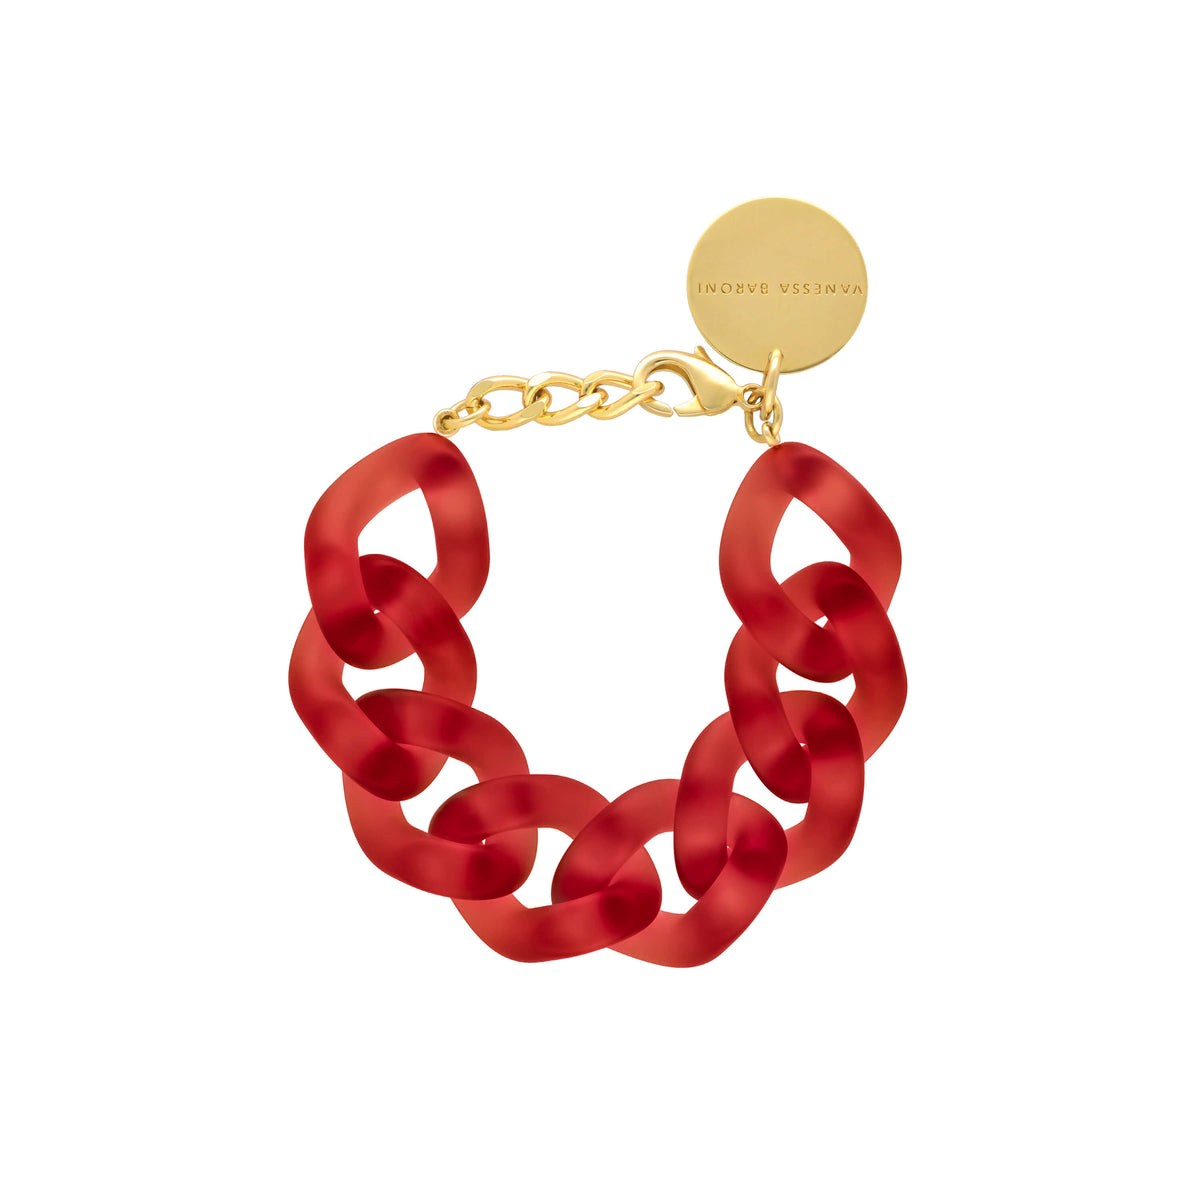 GREAT Bracelet Iced Red